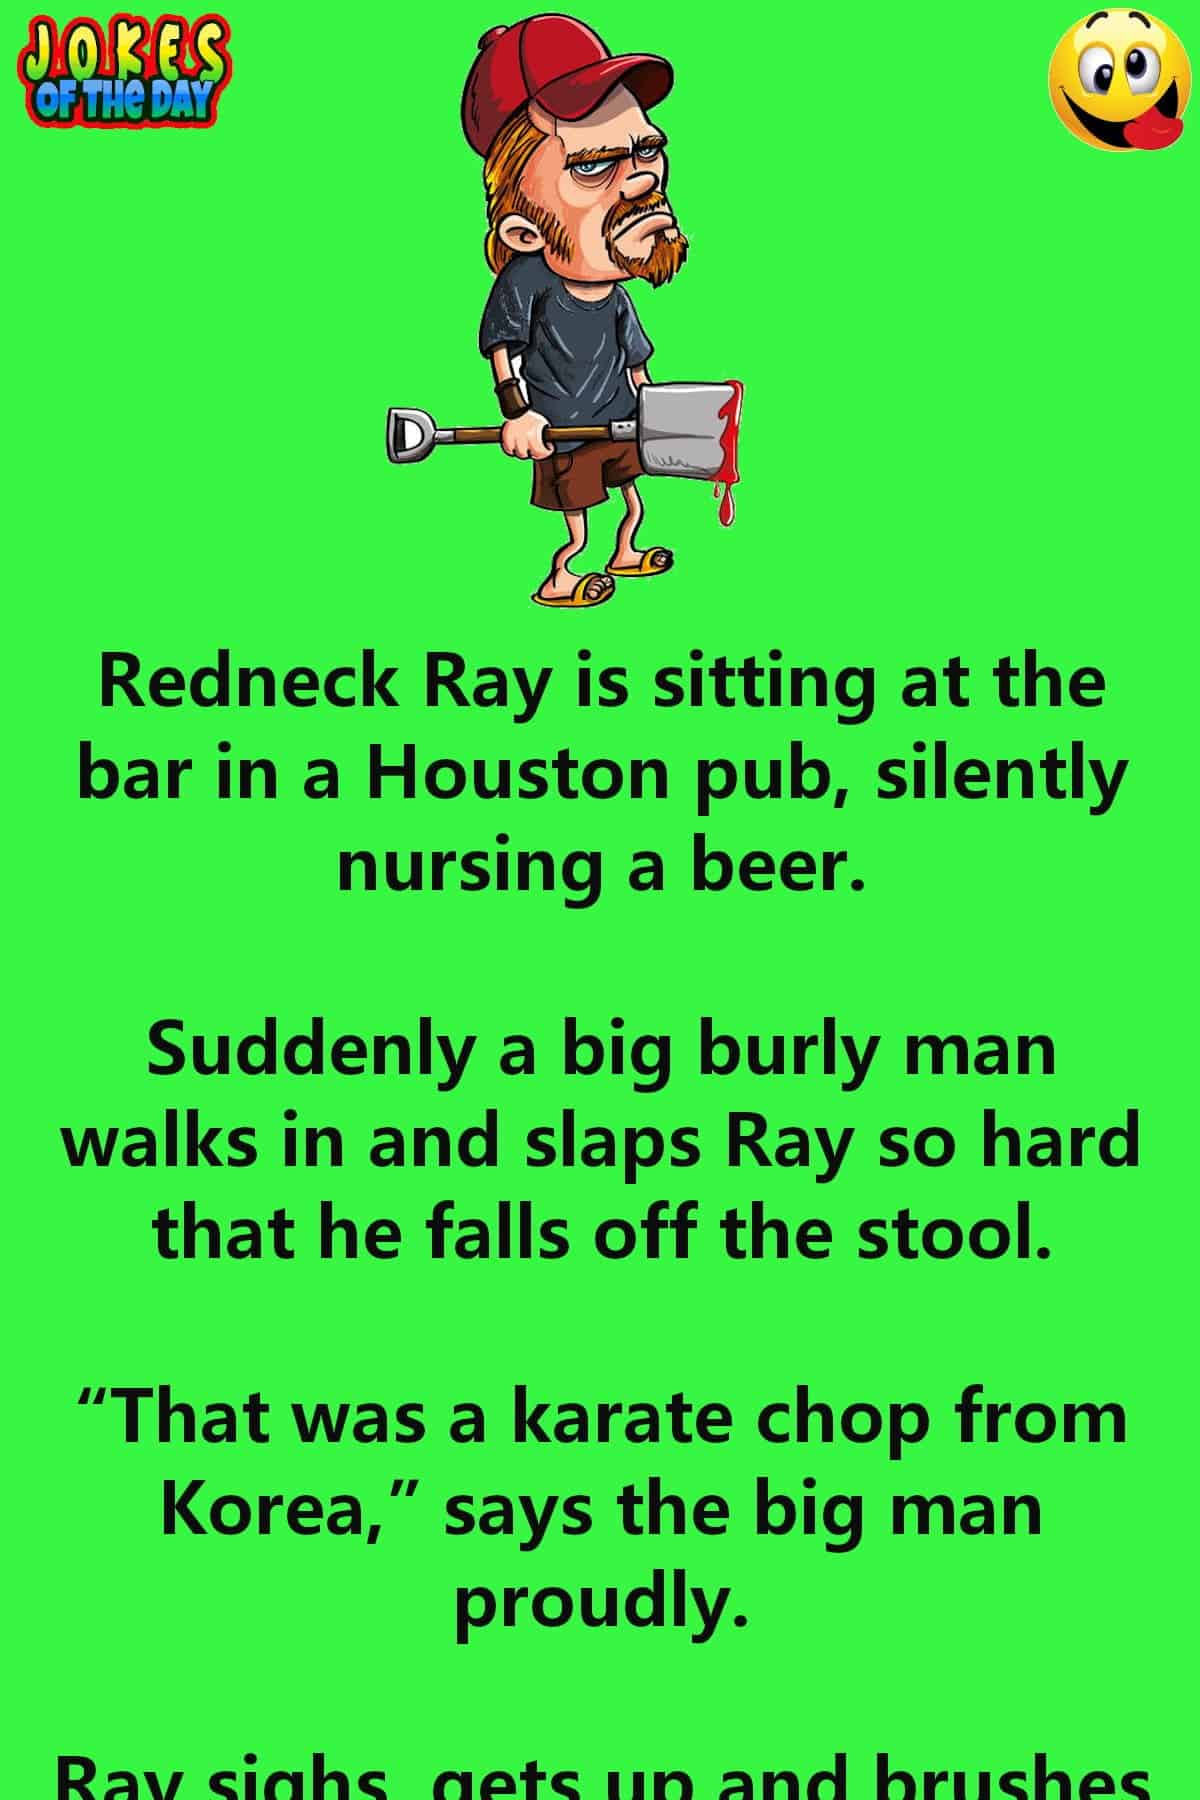 Joke - Redneck Ray is sitting at the bar